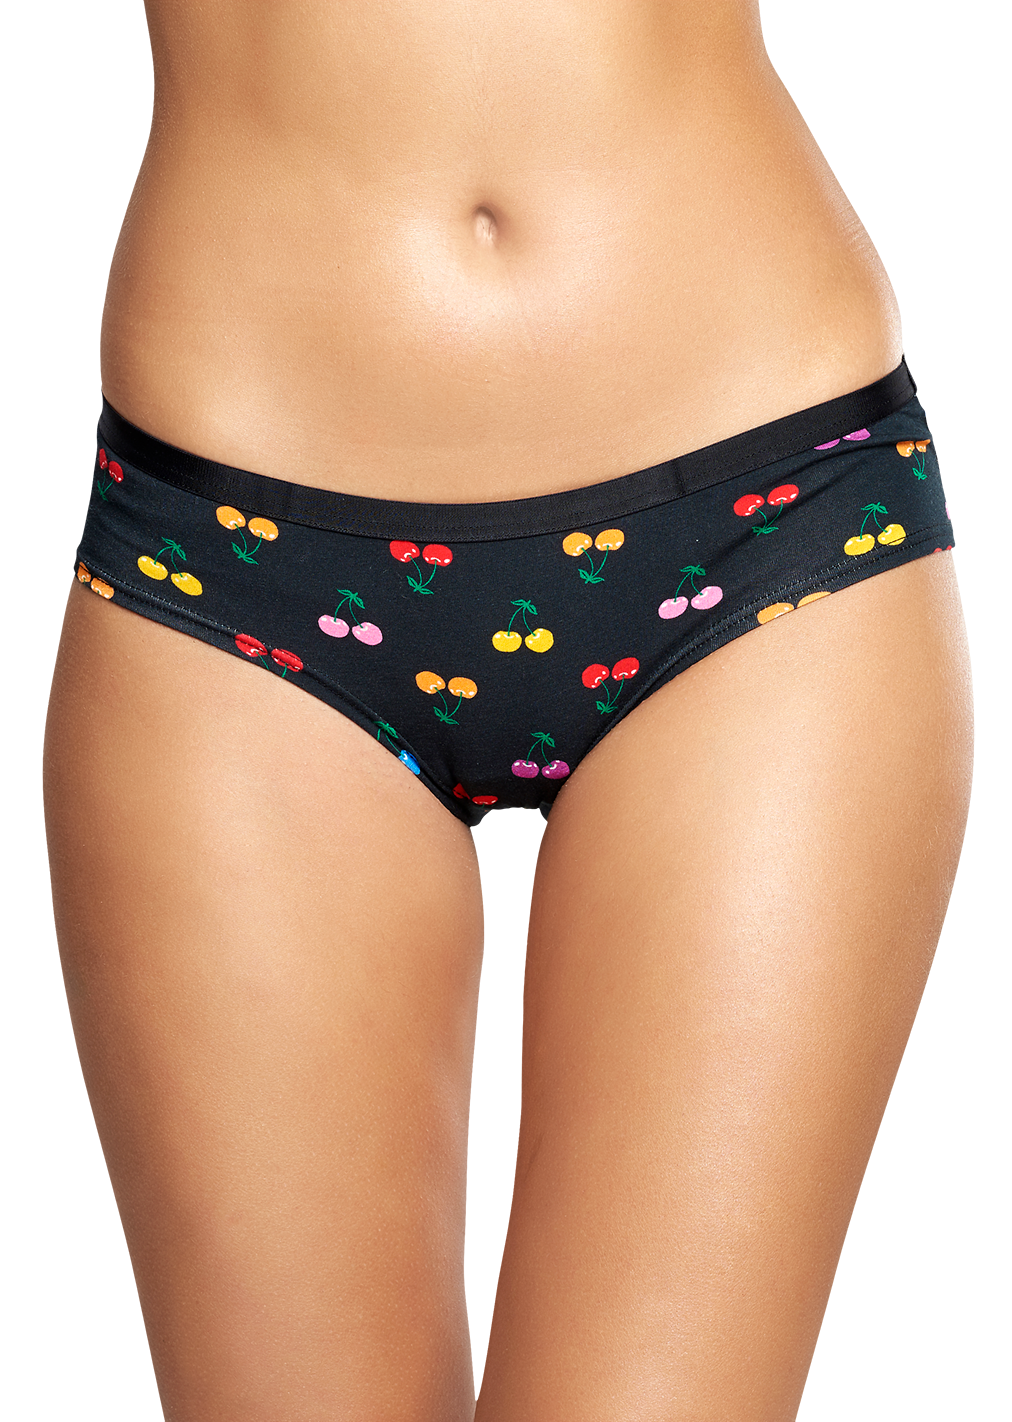 3 PACK UNDERWEAR FOR YOUR GIRLS, CHERRIES FLOWERS AND MORE